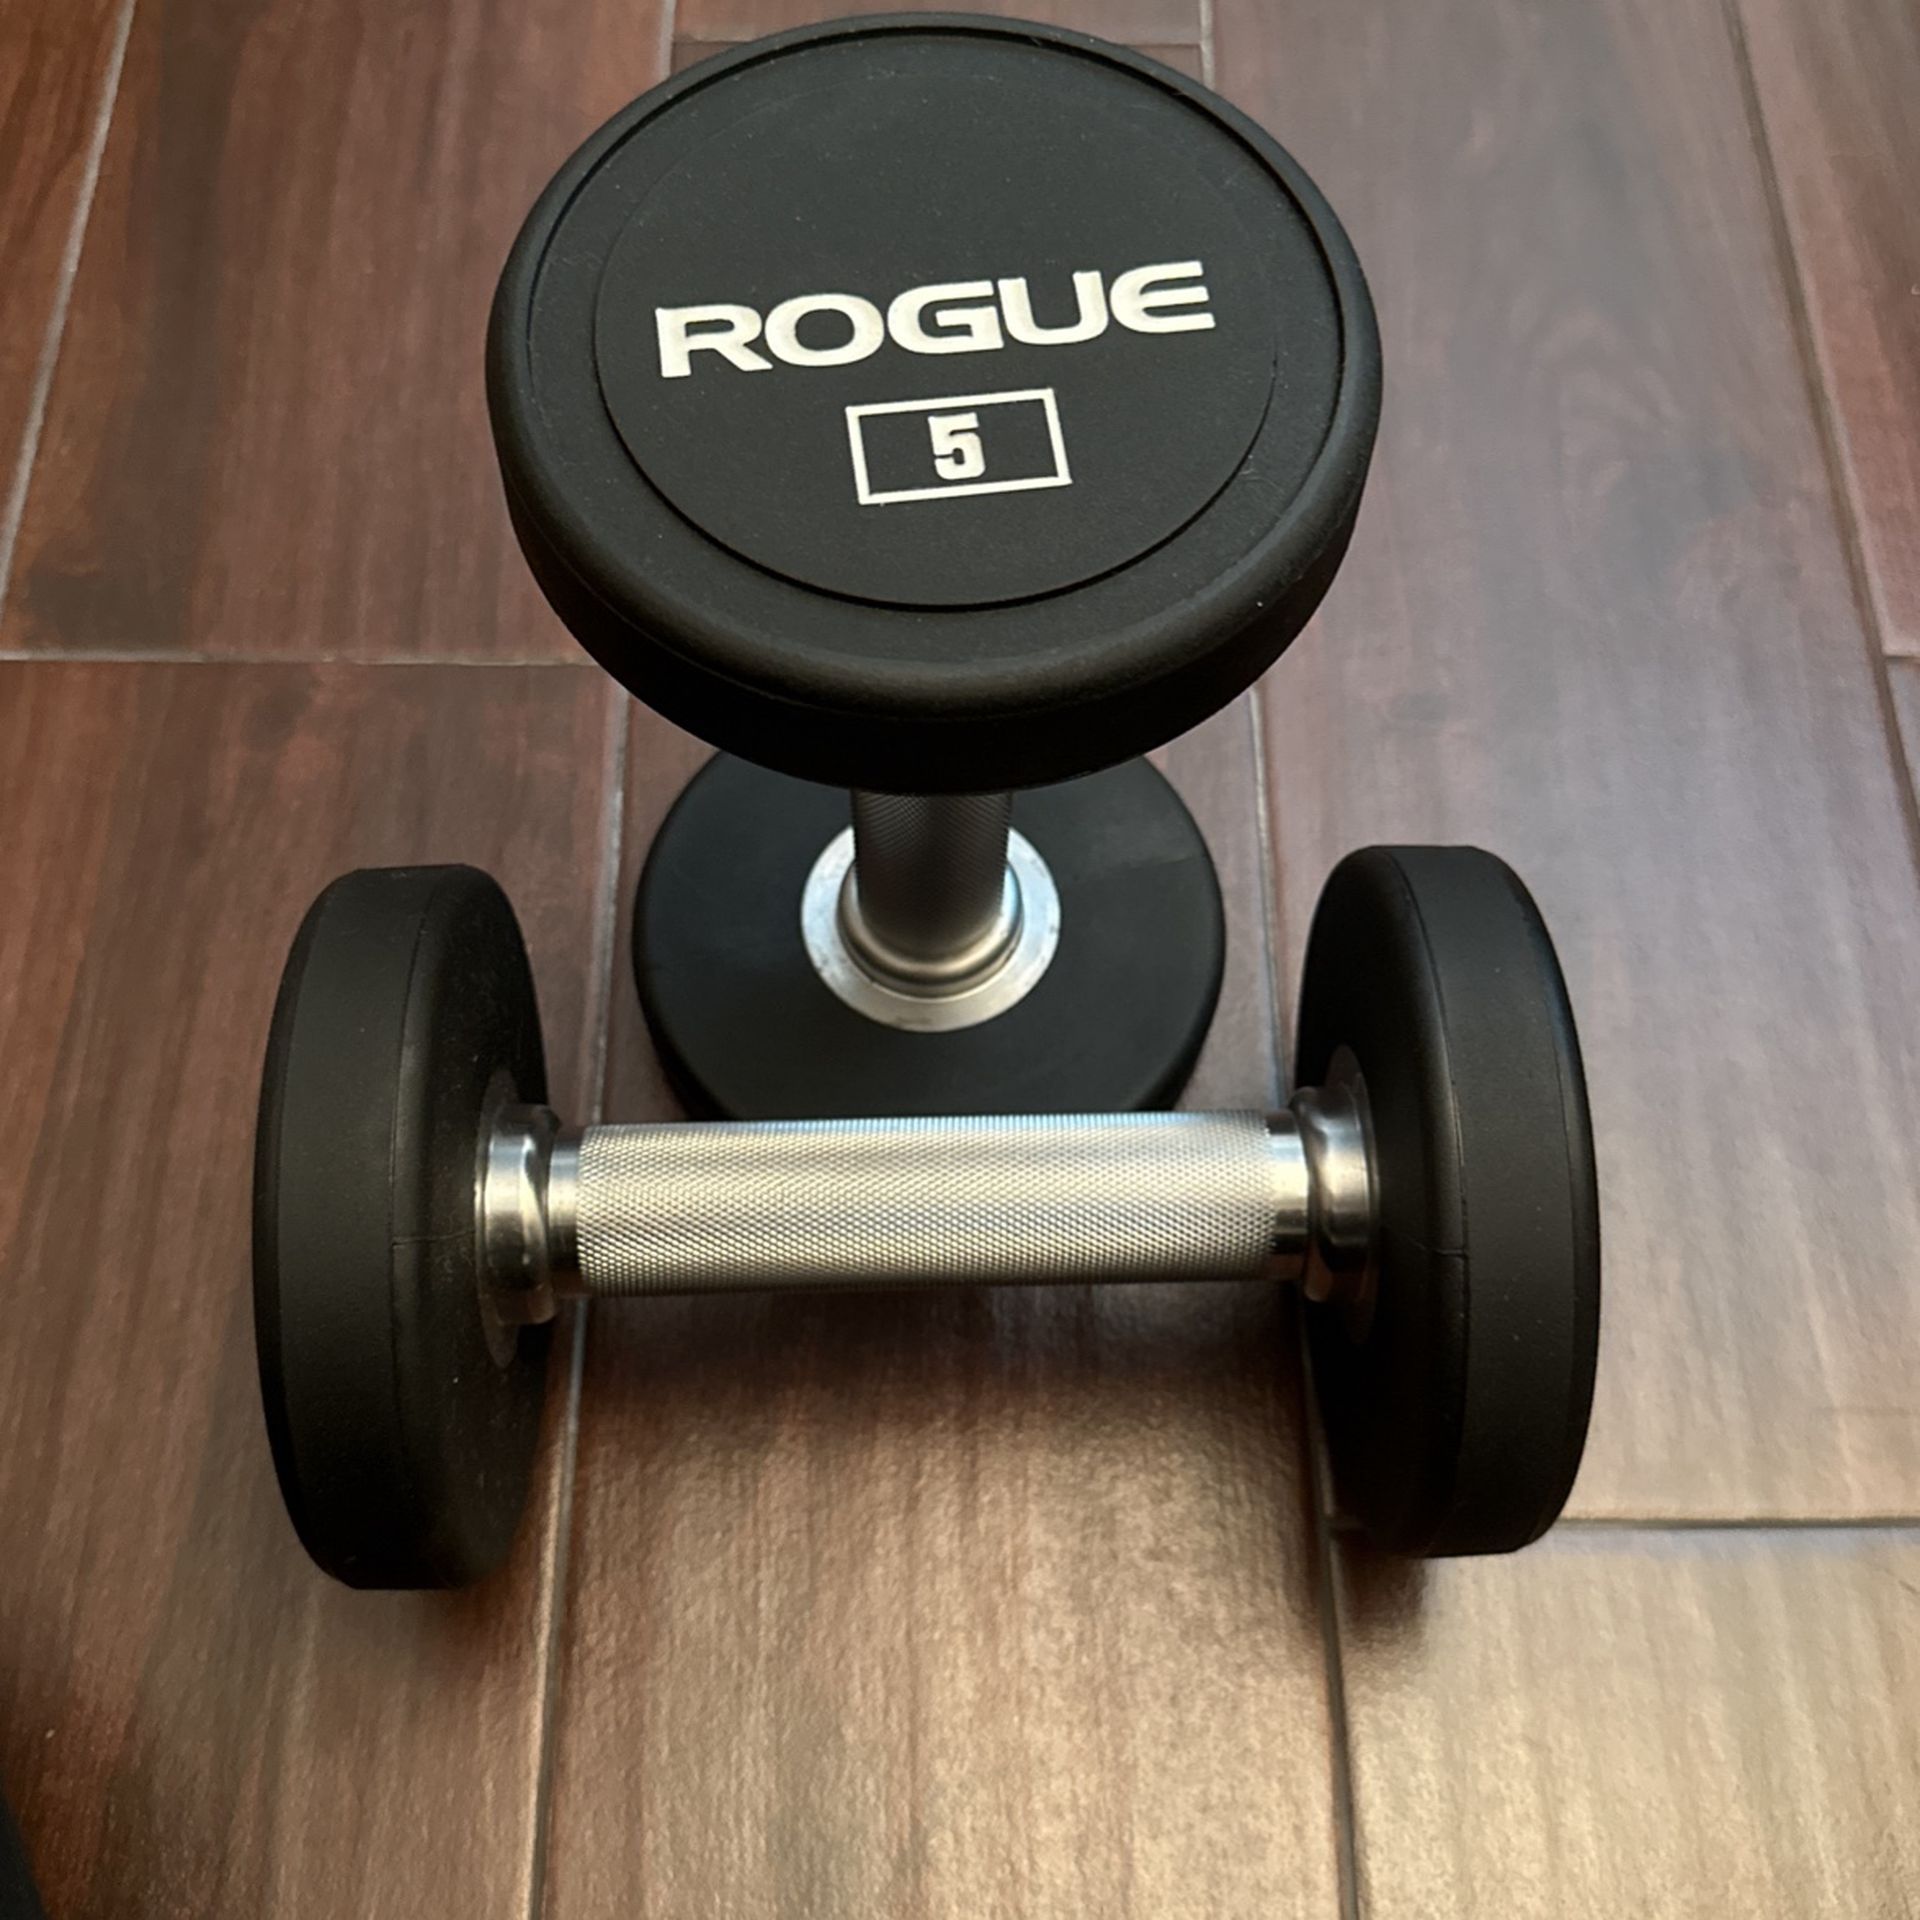 Rogue dumbbell 